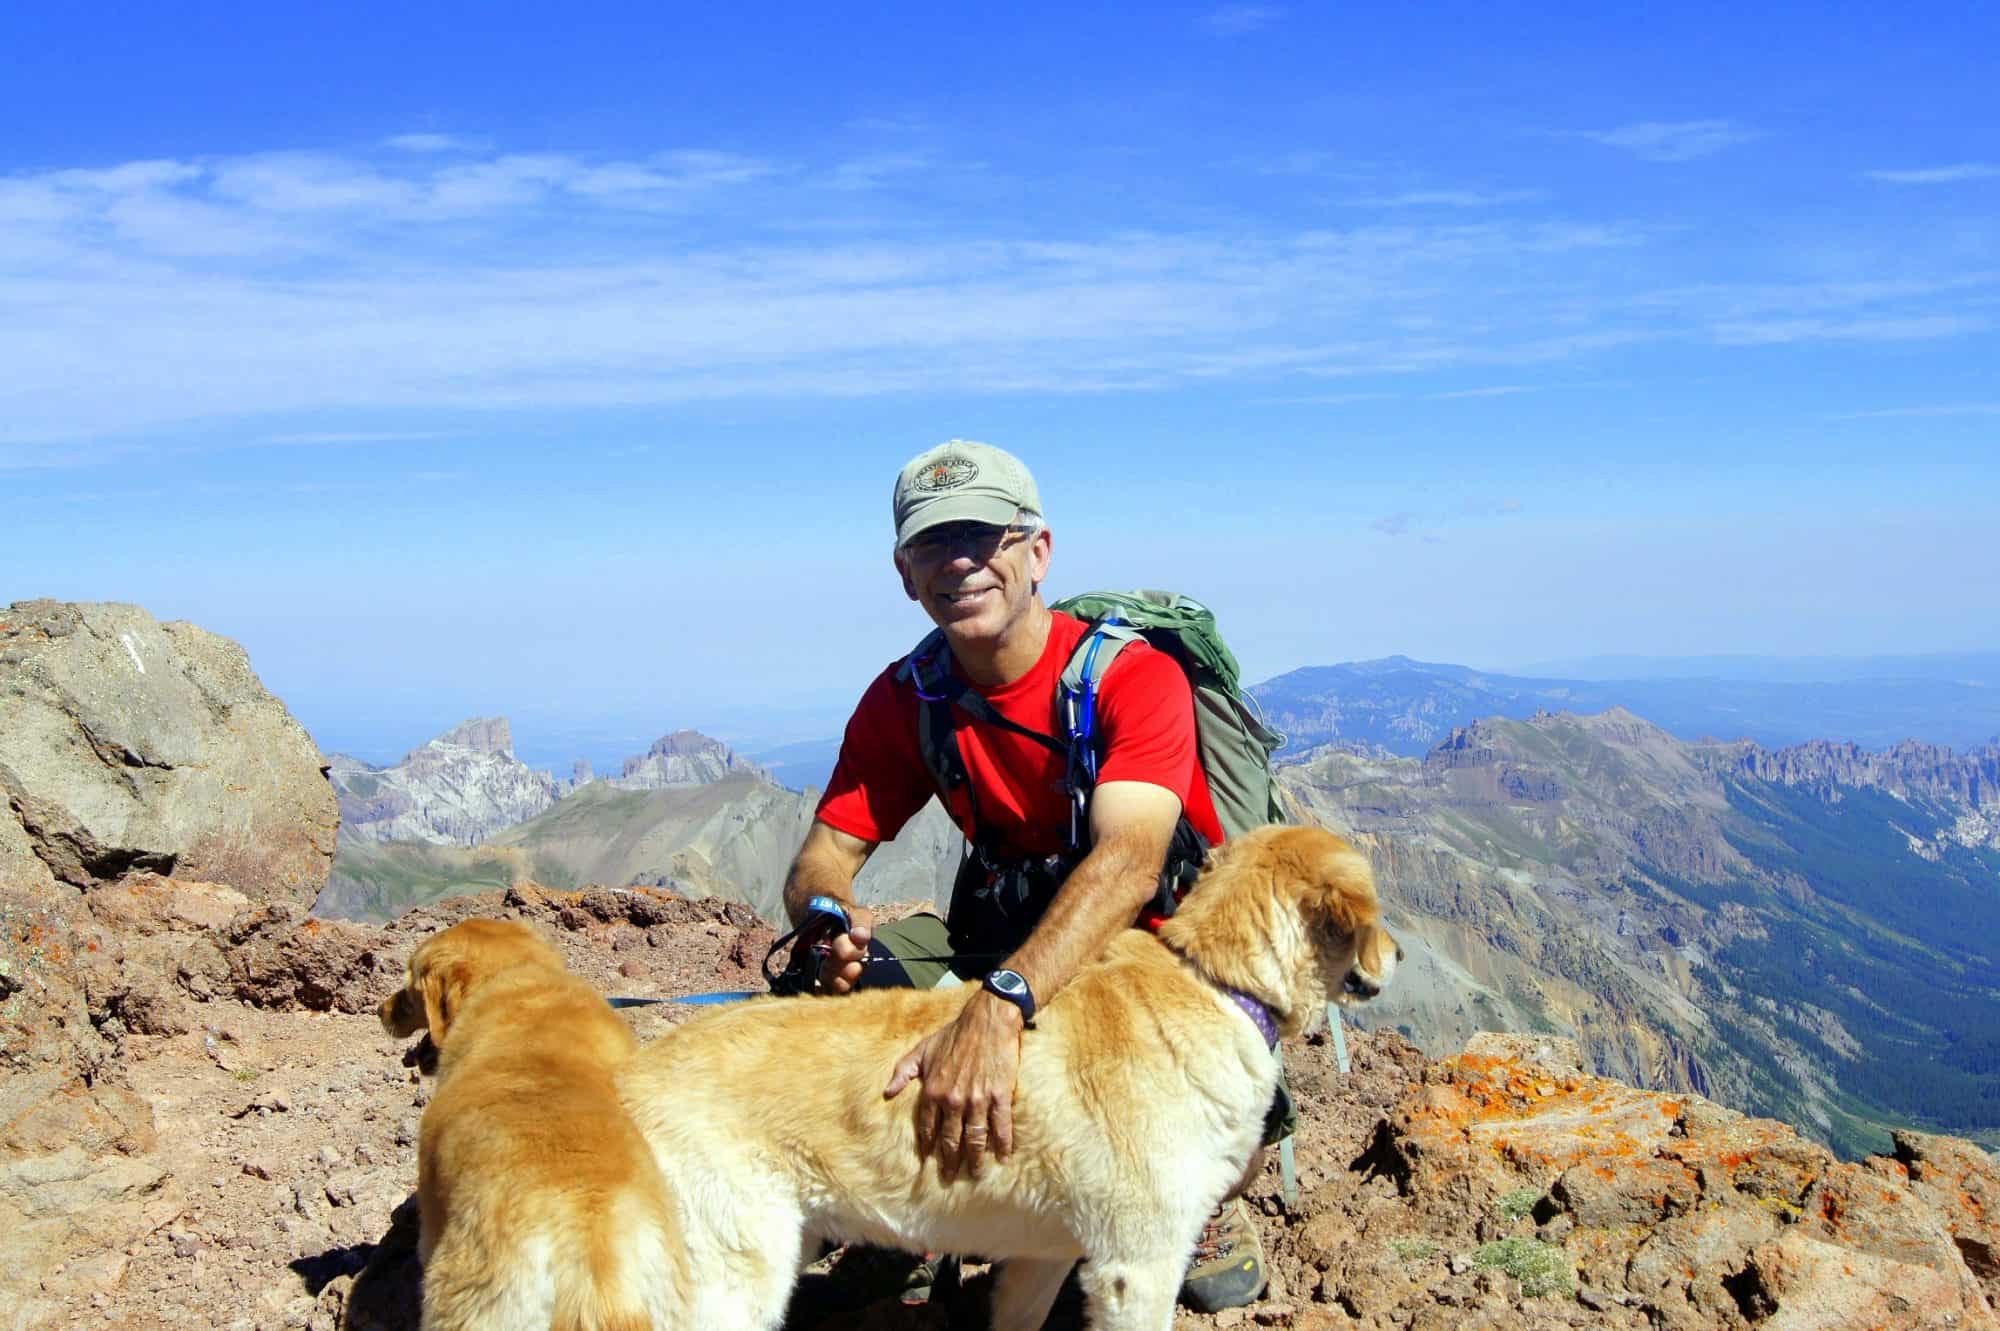 Dr. Gastellum’s Perspective on Hiking with Dogs